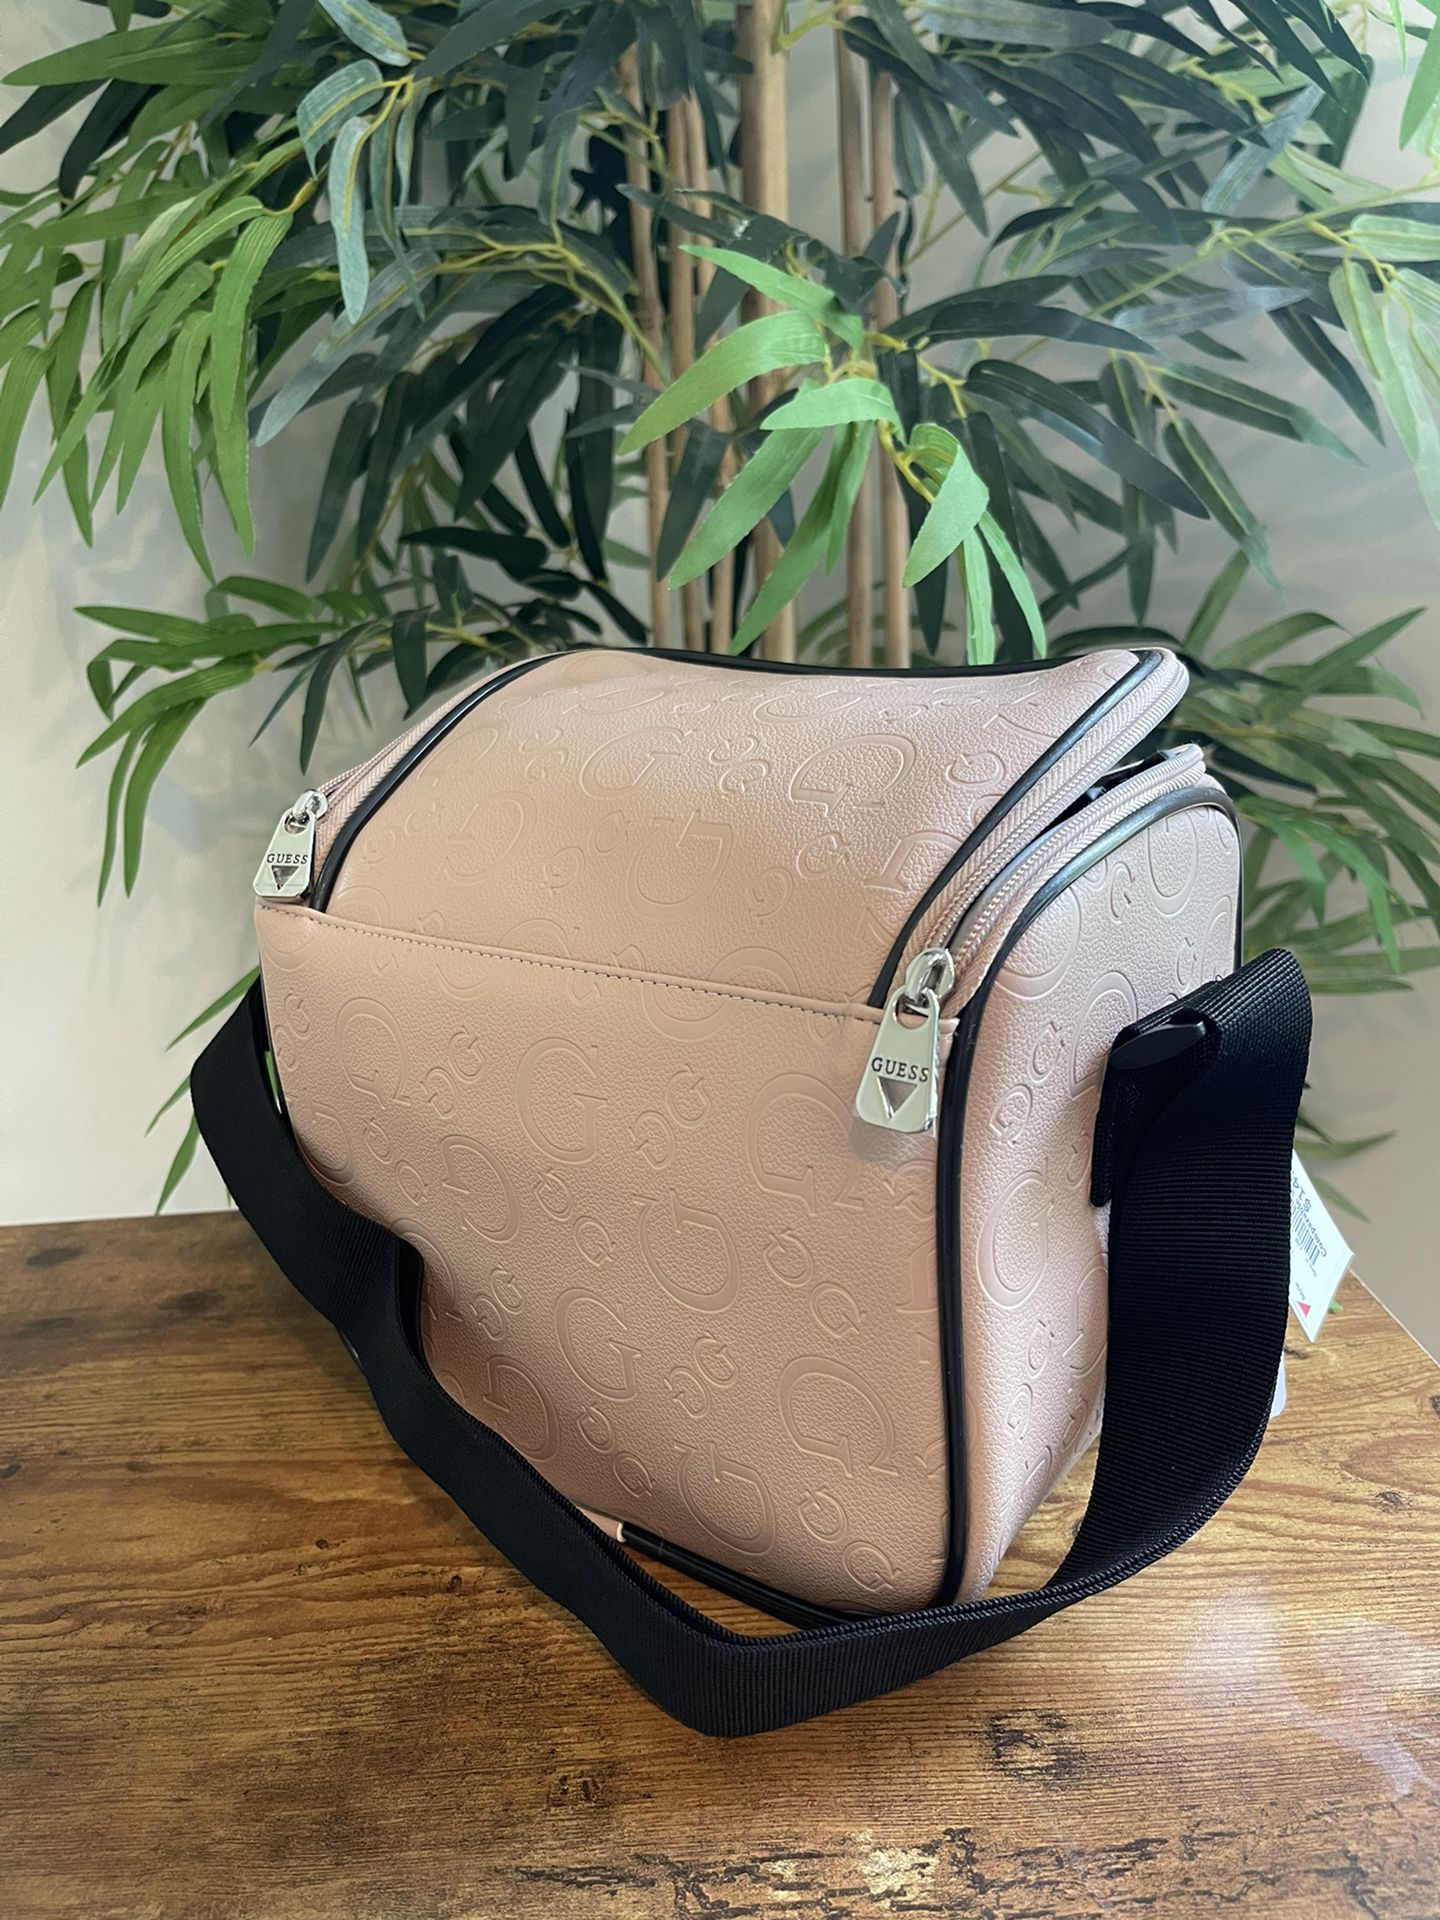 Fulton Lunch Bag Lonchera for Sale in Mesquite, TX - OfferUp